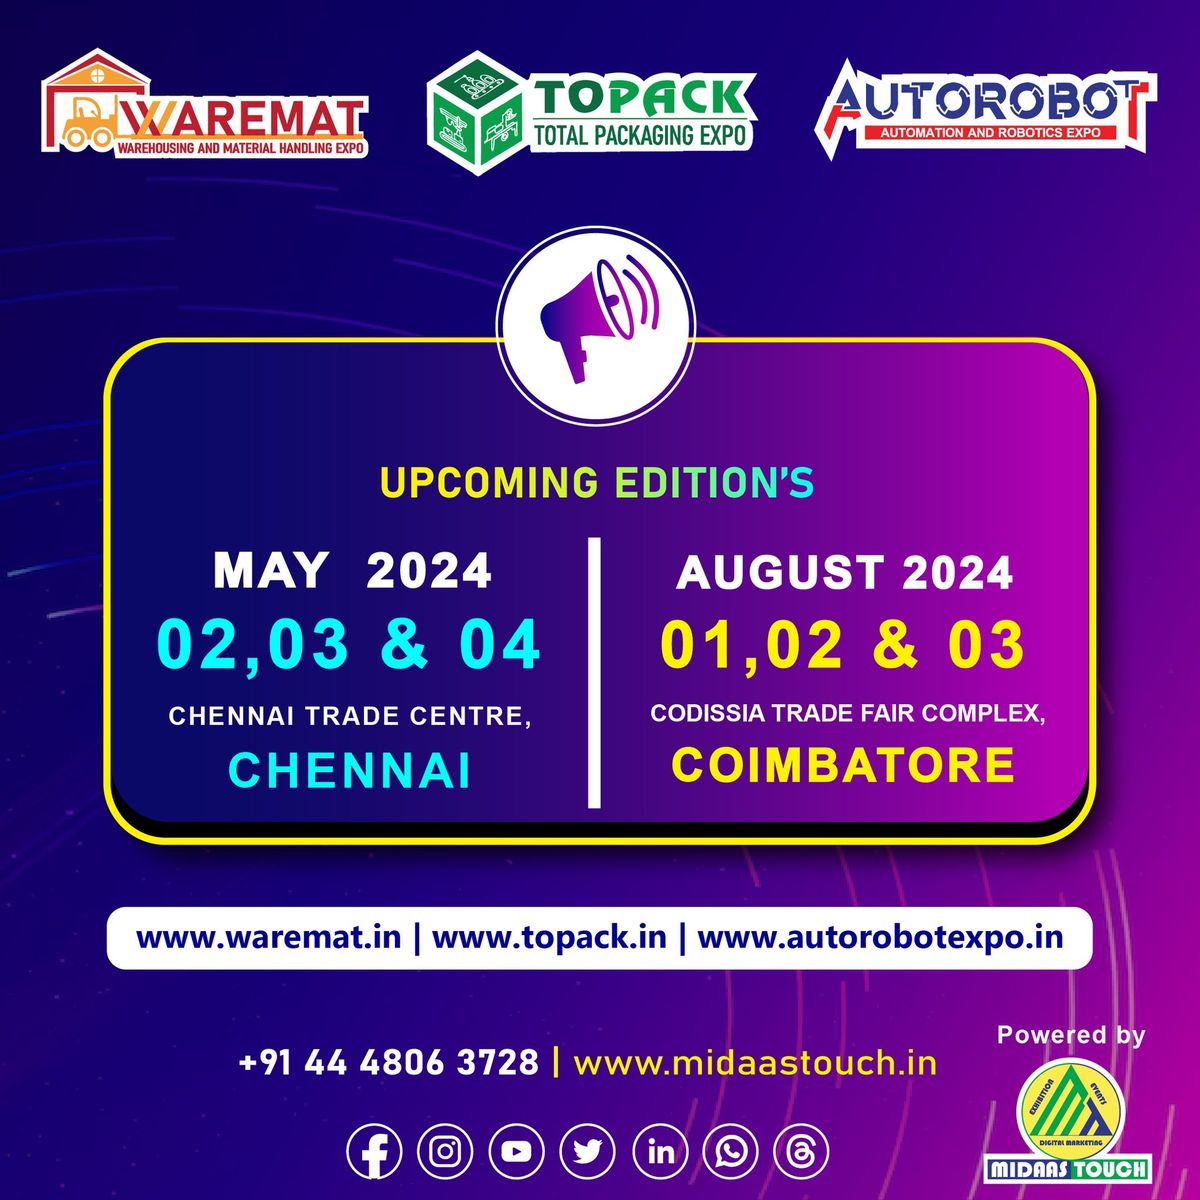 TOPACK - Total Packaging Exhibition | CODISSIA, Coimbatore